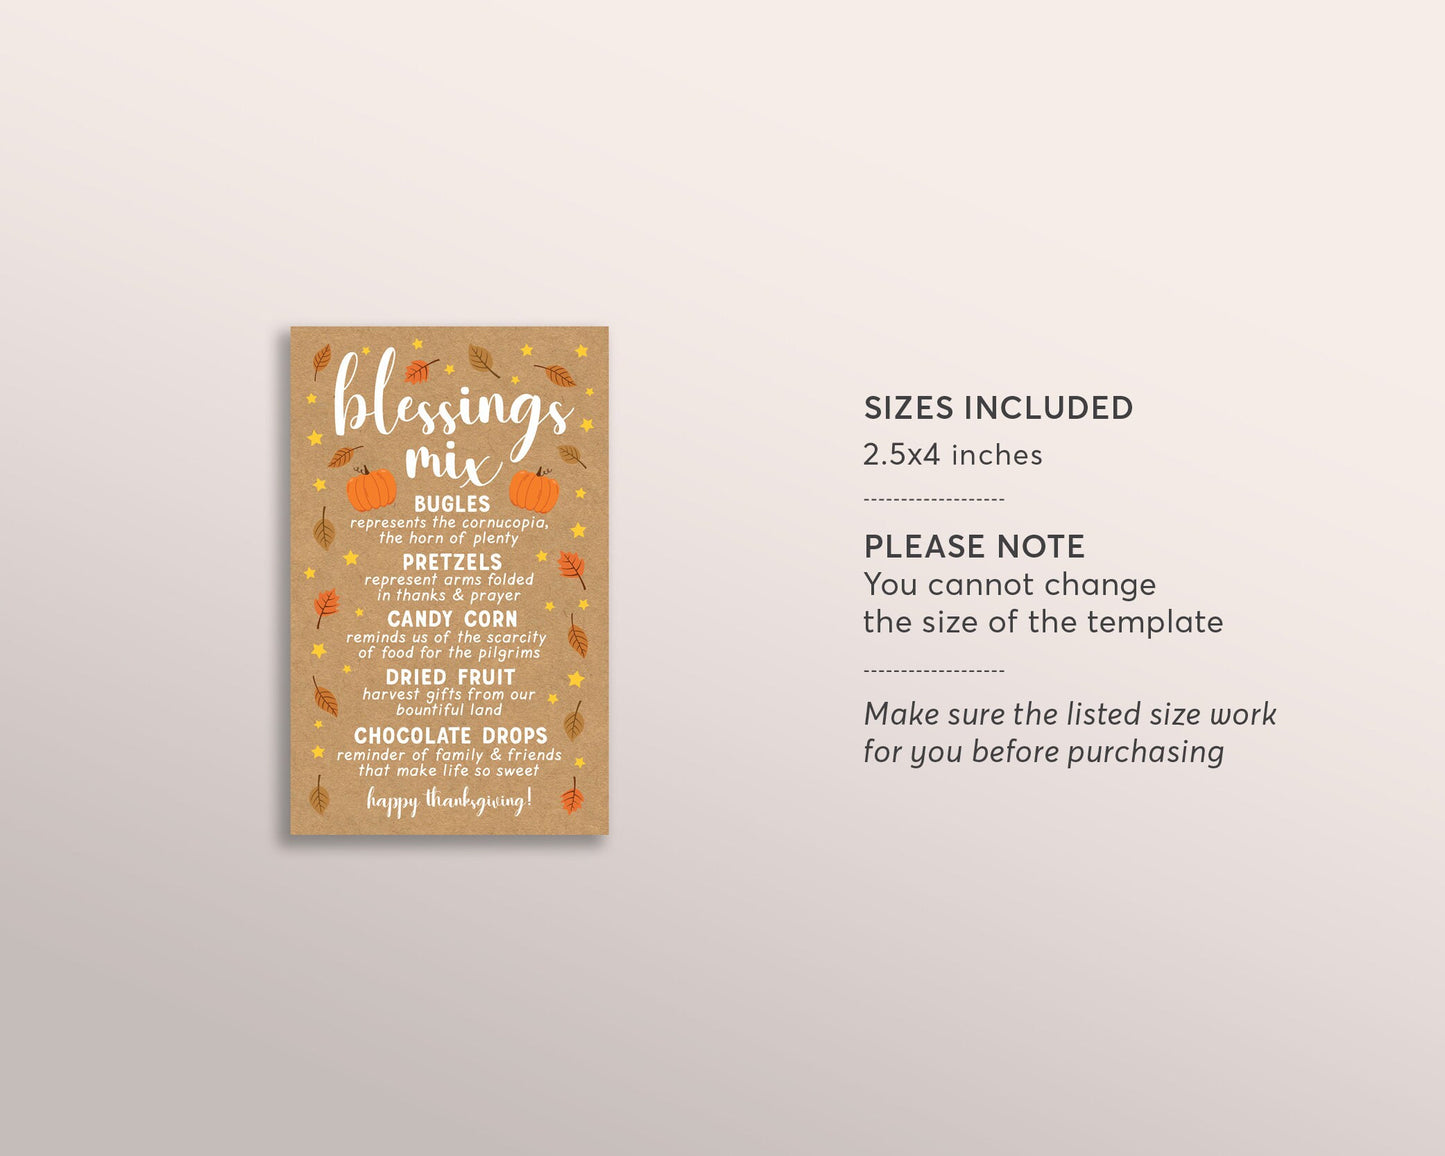 Printable Blessings Mix Gift Tag Editable Template, Thanksgiving Treat Favor Tags Label, Employee Staff Appreciation Teacher School PTO PTA